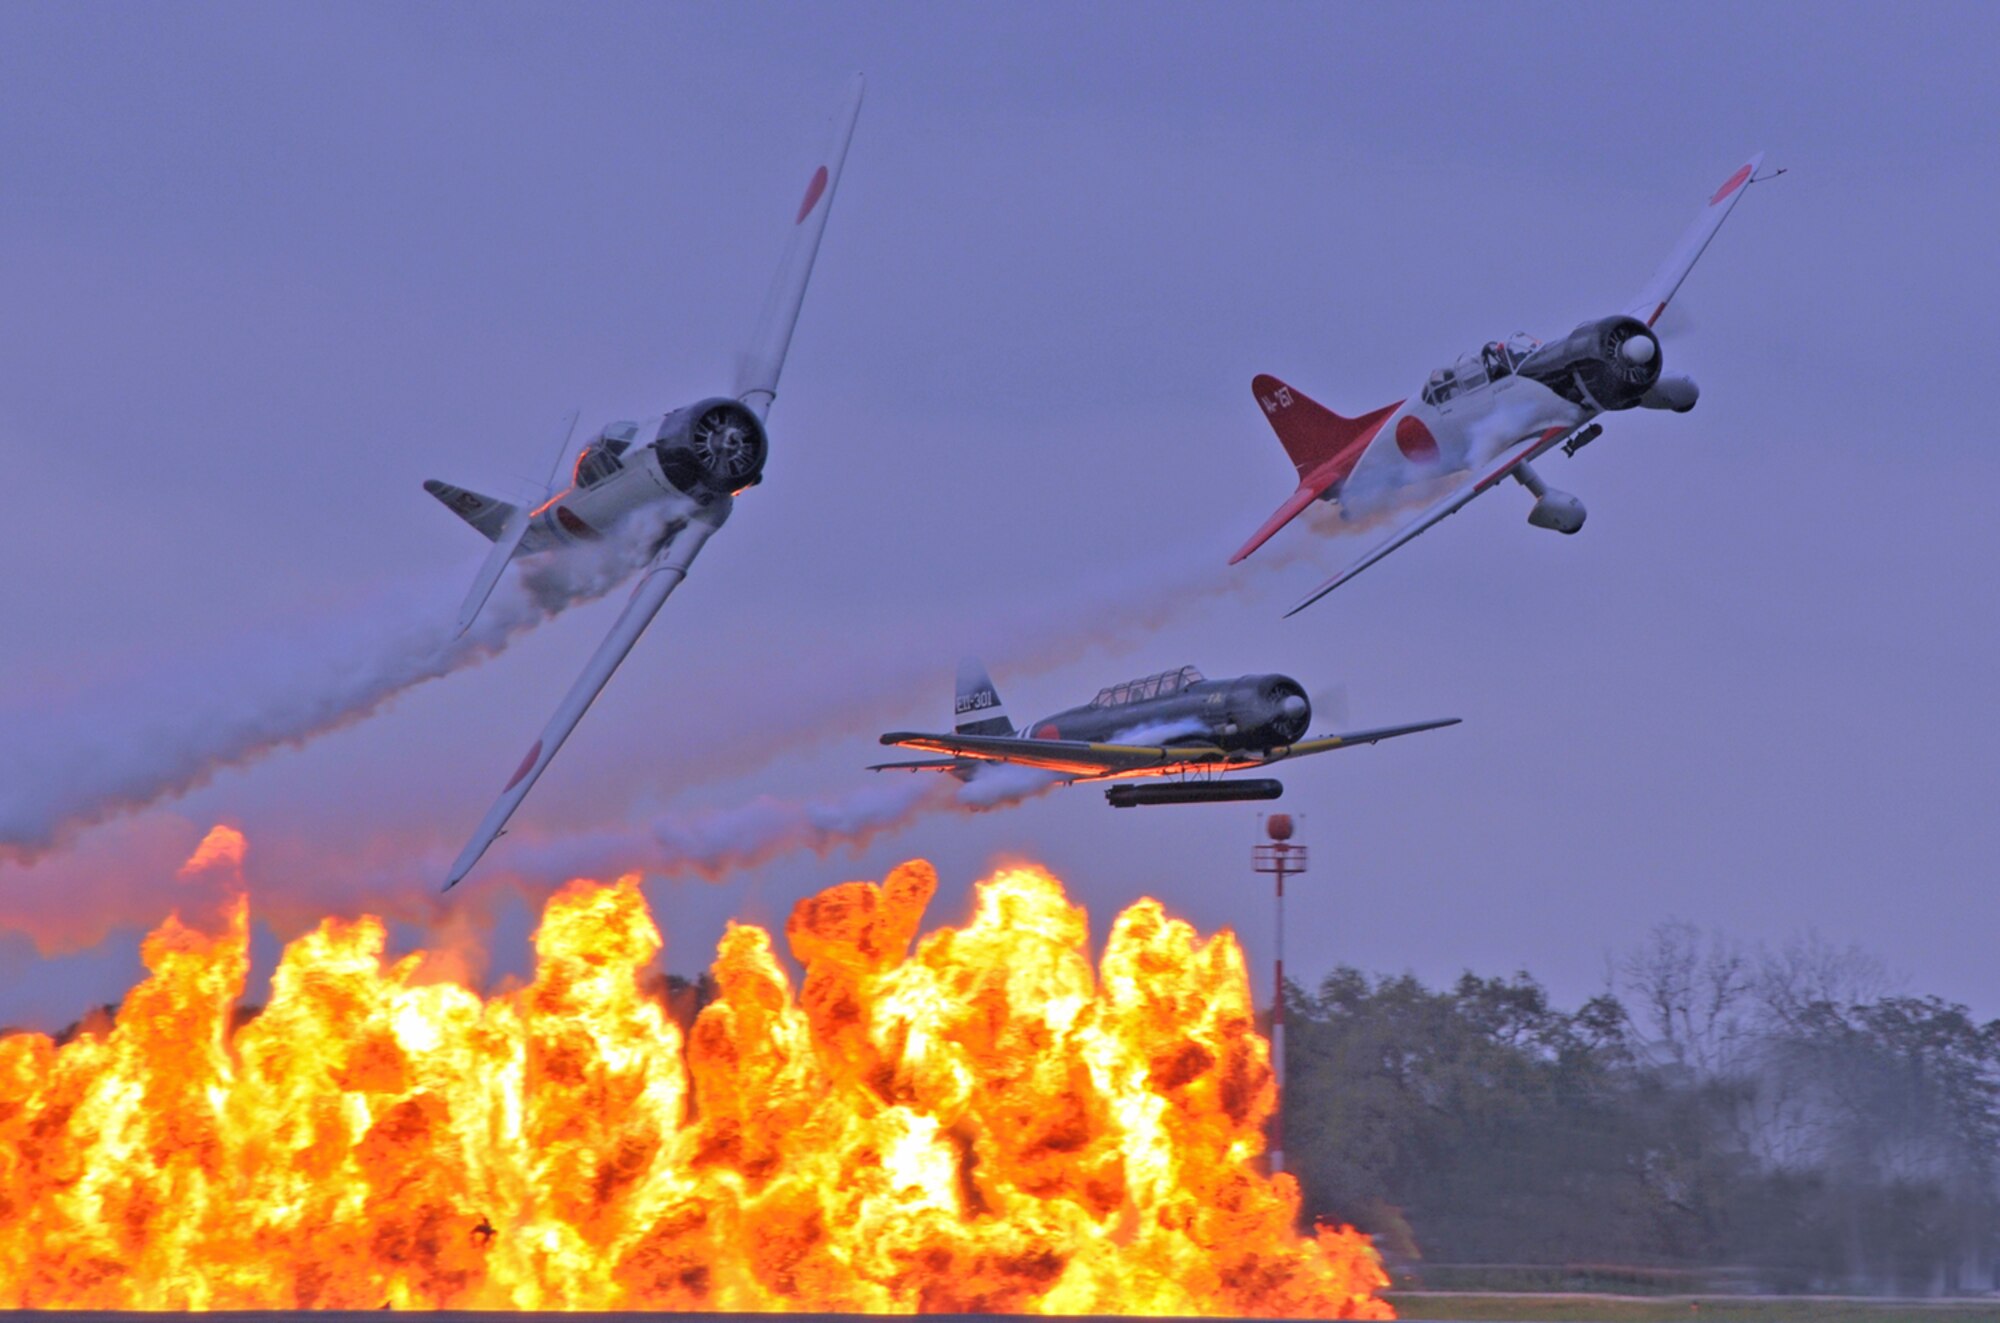 TORA TORA TORA is a re-creation of the December 7th 1941 attack on Pearl Harbor. TORA provides breathtaking smoke, fire and explosions from the pyrotechnics team. The purpose is to create a dynamic history lesson about the event that propelled us into World War II .....and entertain.
